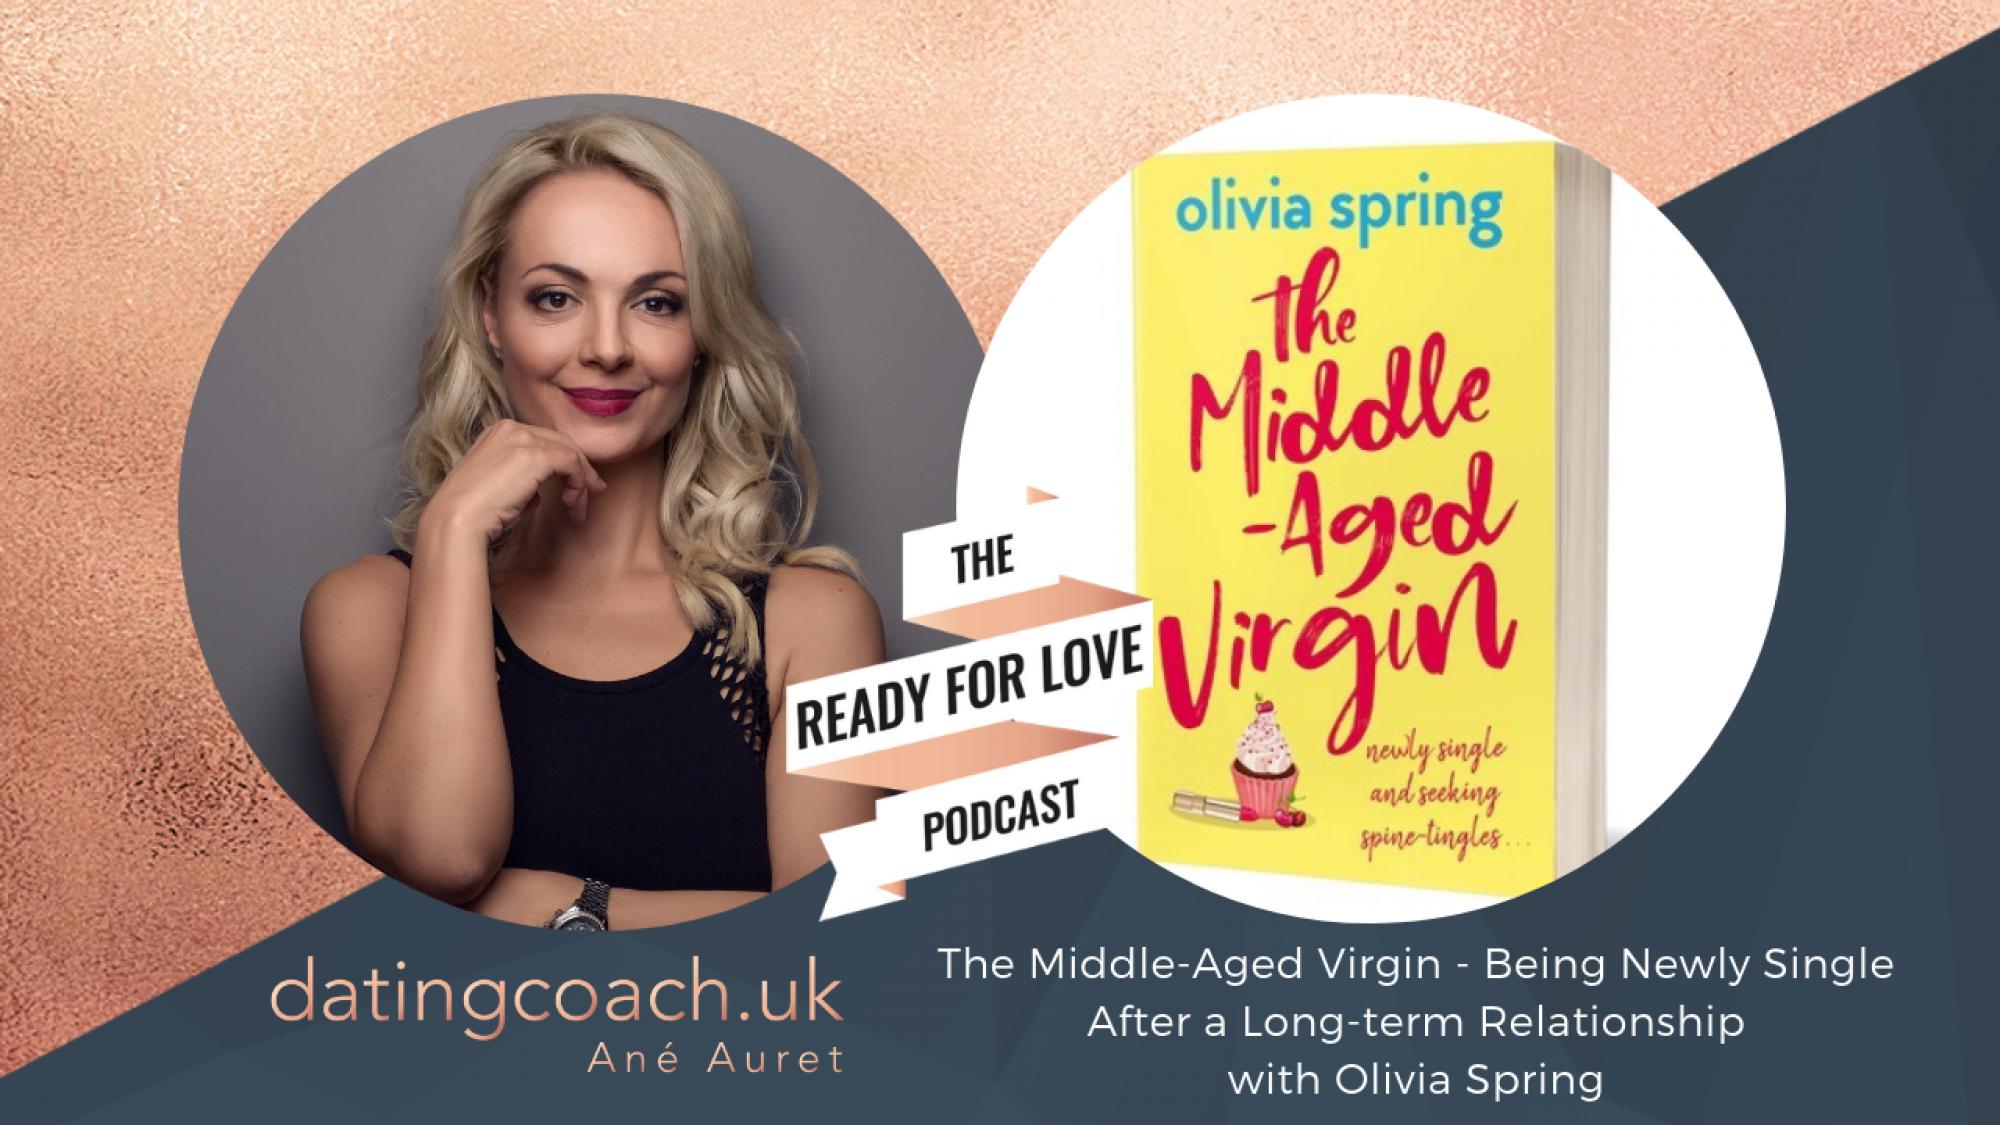 The Middle Aged Virgin Ready for Love Podcast 